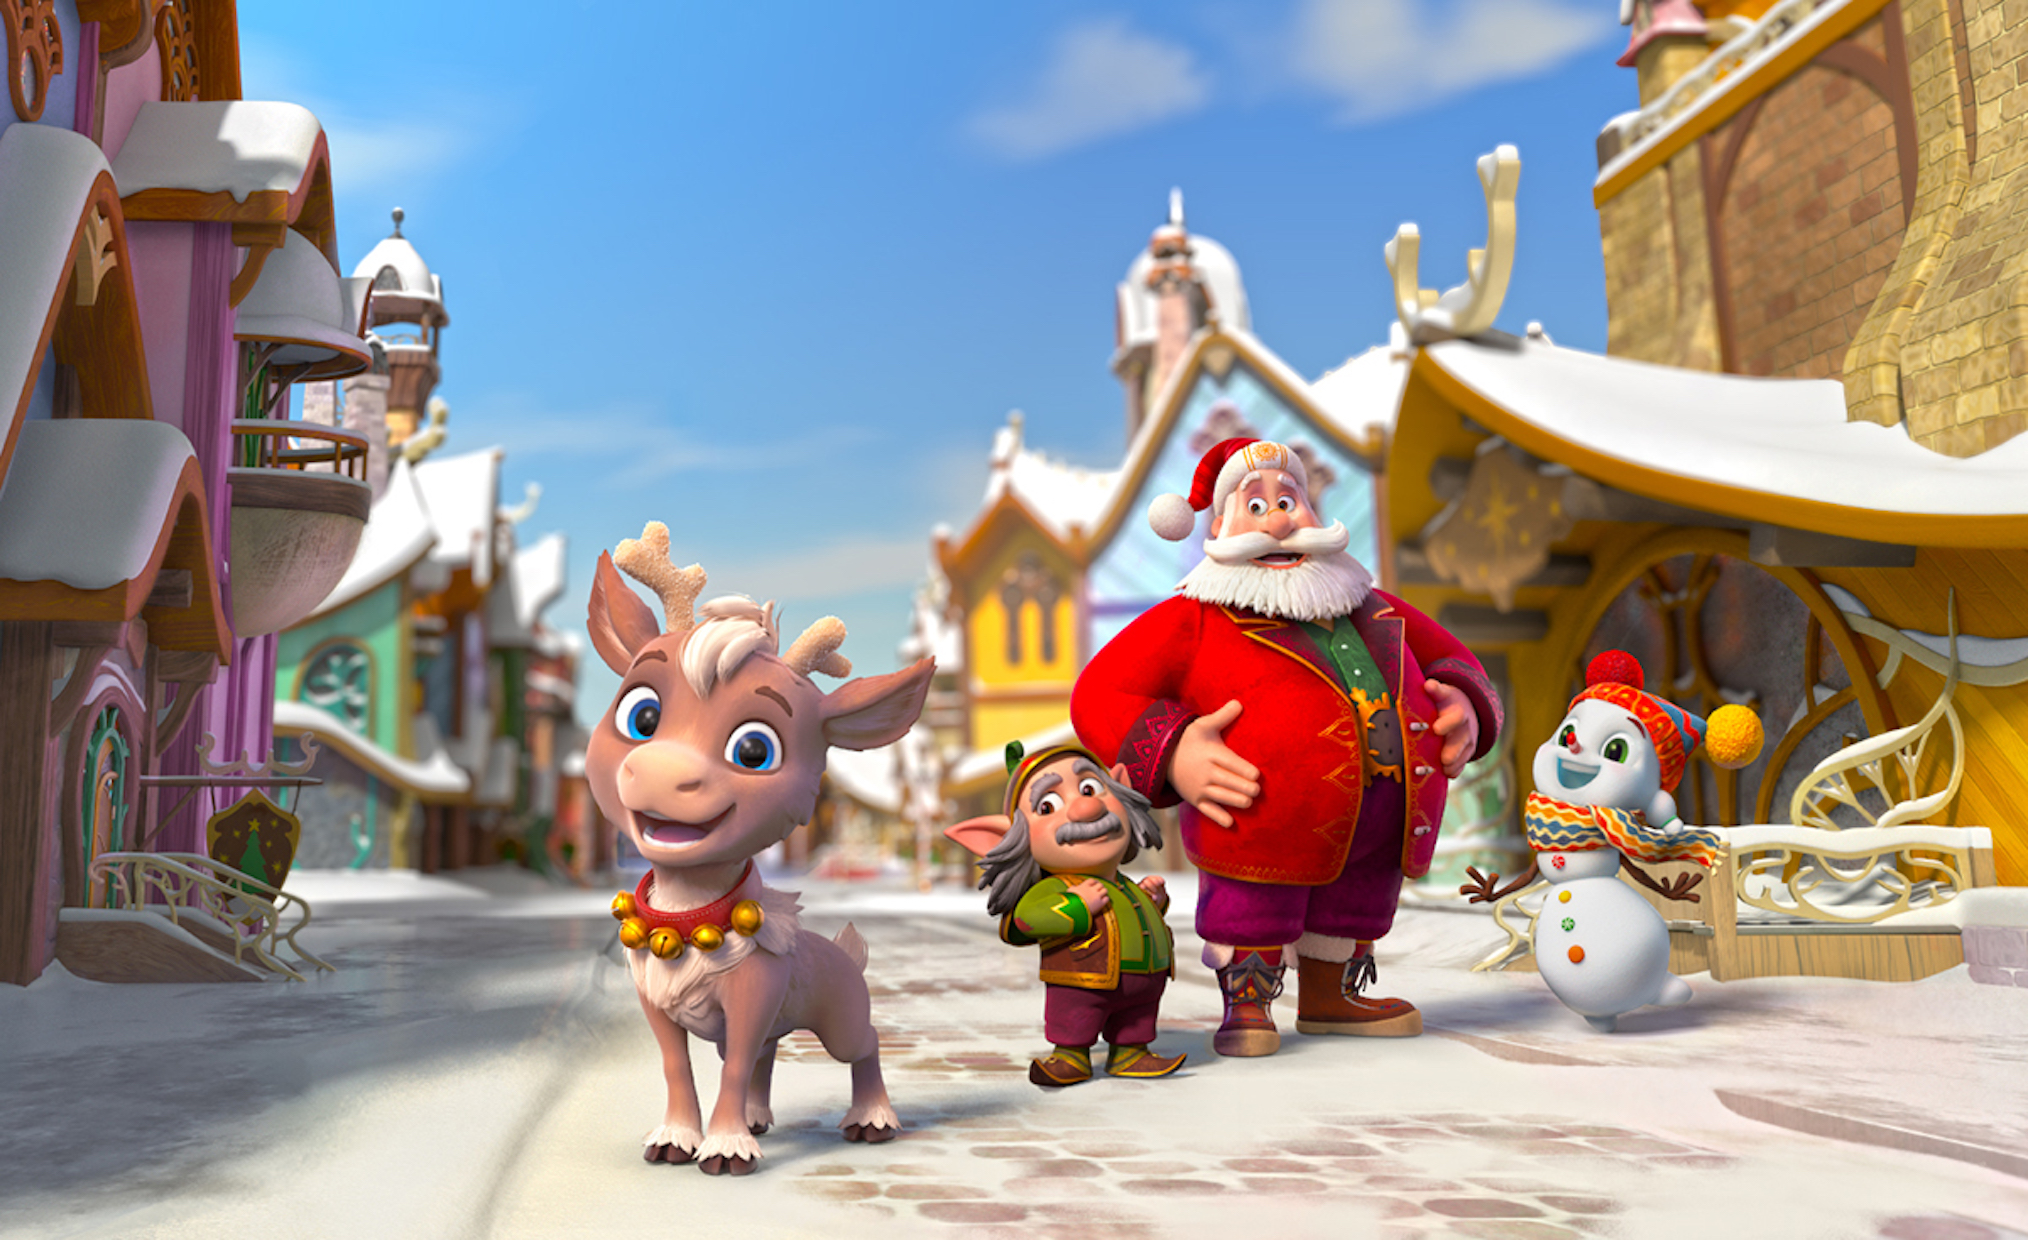 Reindeer in Here': CBS Sets New Animated Holiday Special (PHOTO)